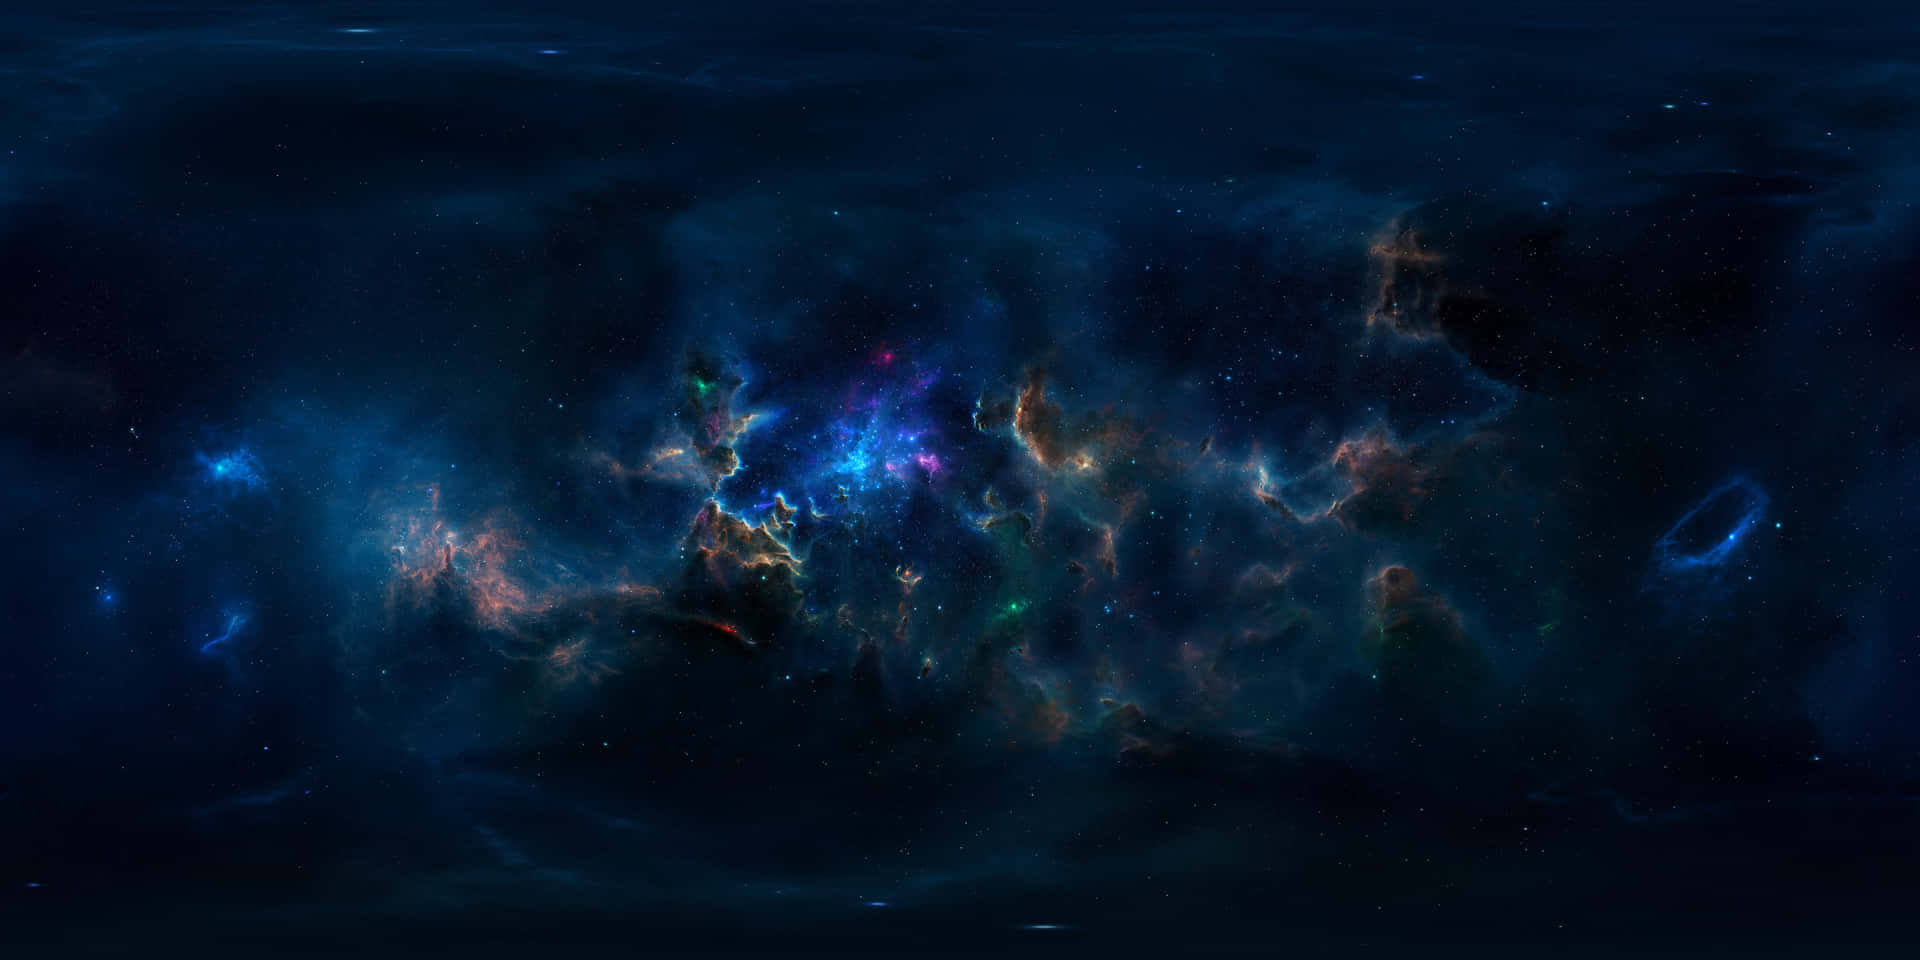 A colorful galaxy-themed painting full of swirling stars and planets Wallpaper